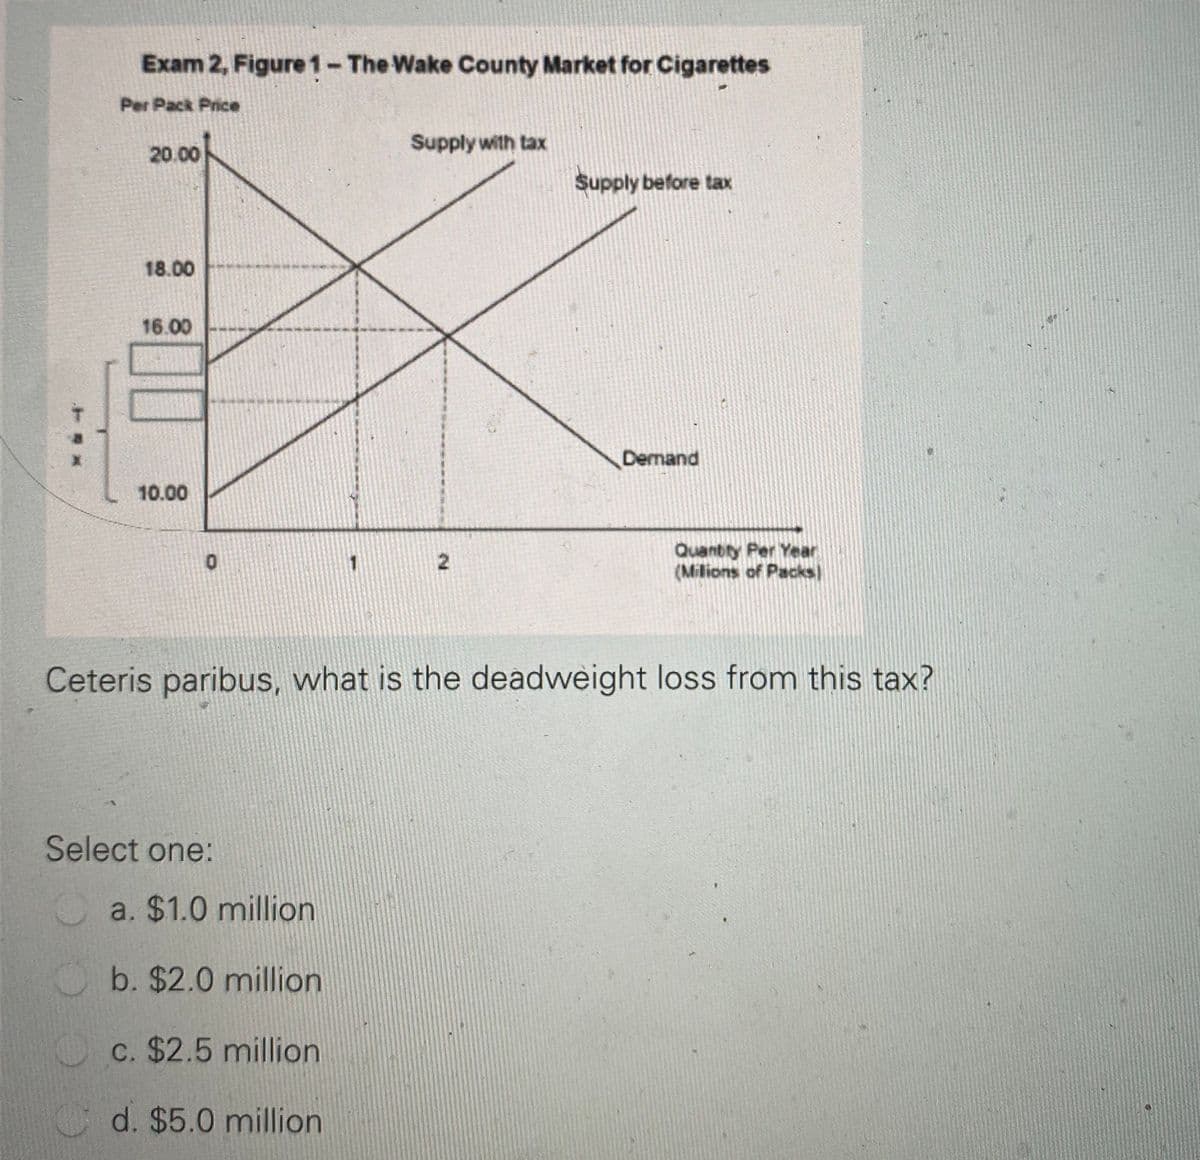 Exam 2, Figure1-The Wake County Market for Cigarettes
Per Pack Price
Supply with tax
20.00
Supply before tax
18.00
16.00
Demand
10.00
Quantity Per Year
(Milions of Packs)
1
Ceteris paribus, what is the deadweight loss from this tax?
Select one:
a. $1.0 million
b. $2.0 million
c. $2.5 million
Cd. $5.0 million
2.
